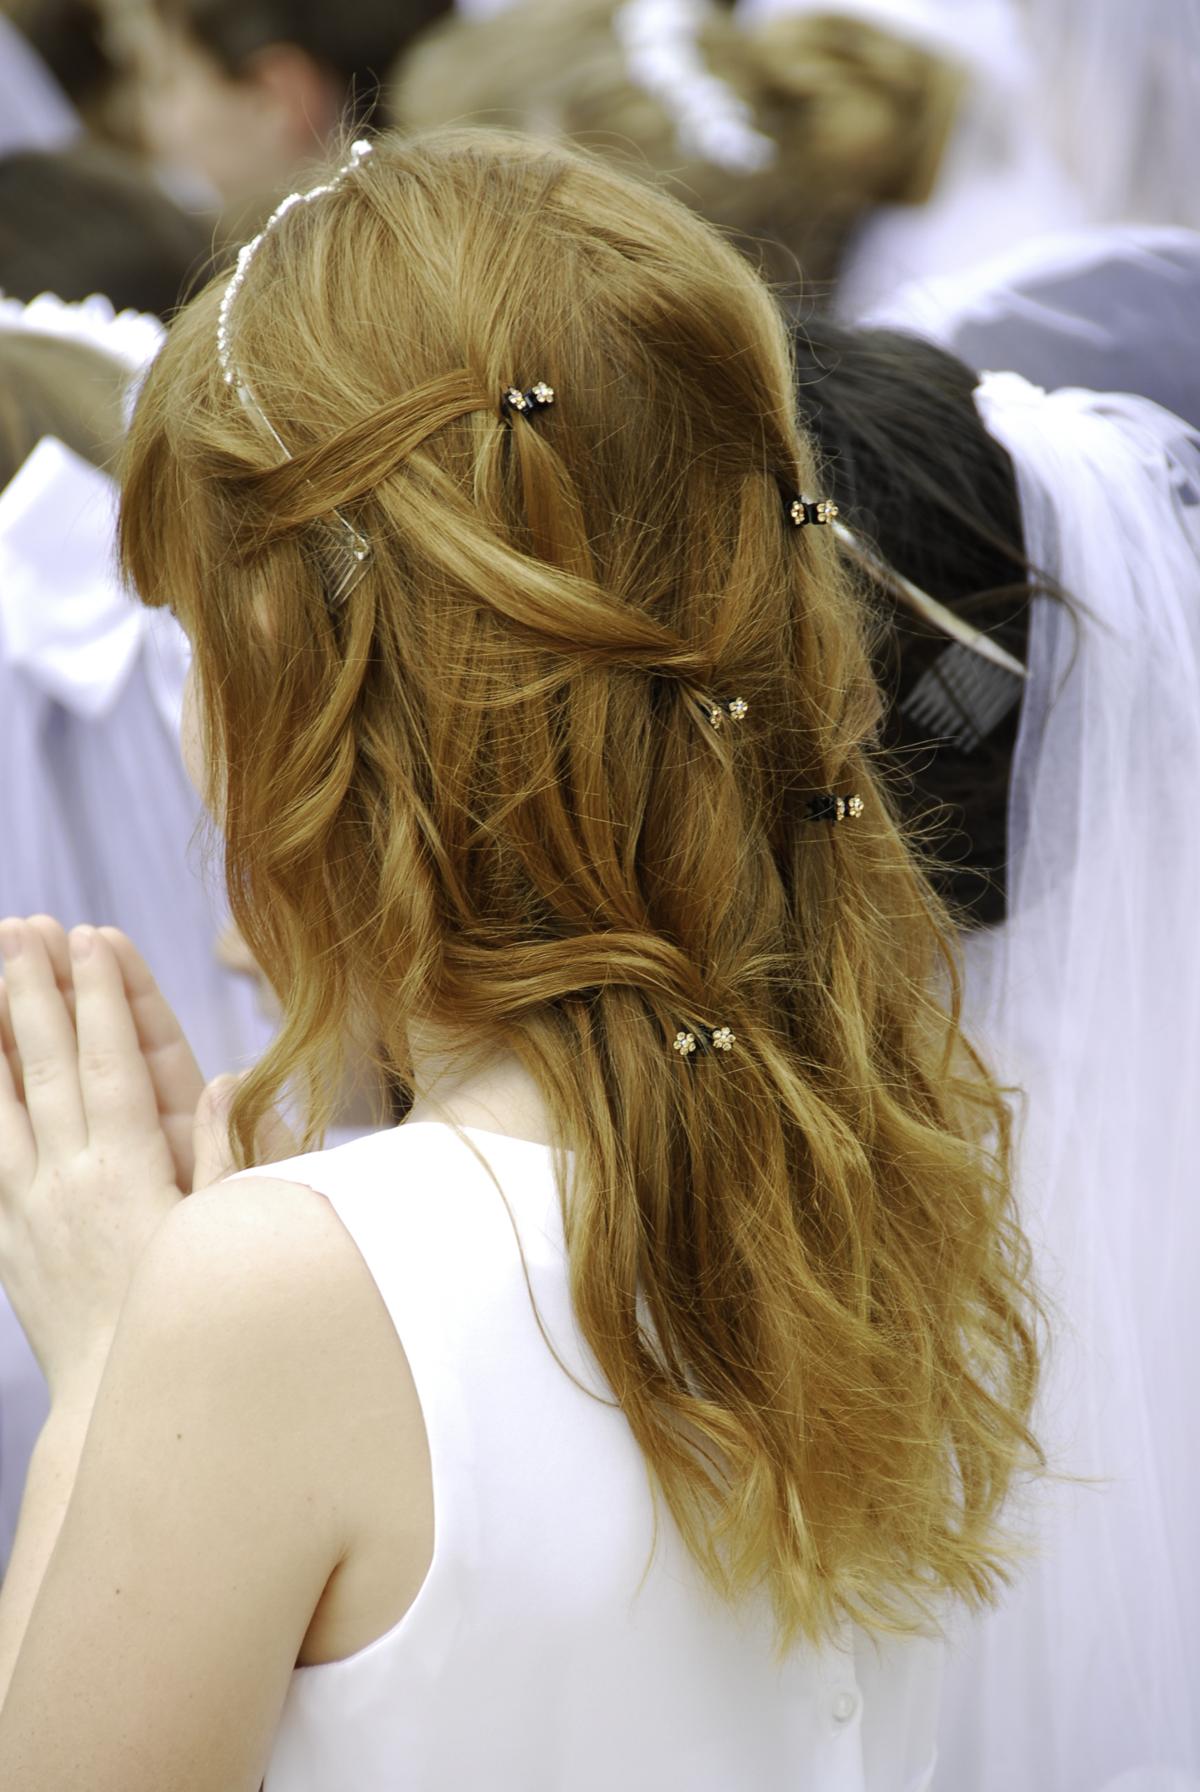 28 Easy First Communion Hairstyles for Girls That Stole Our Heart - Hair Glamourista